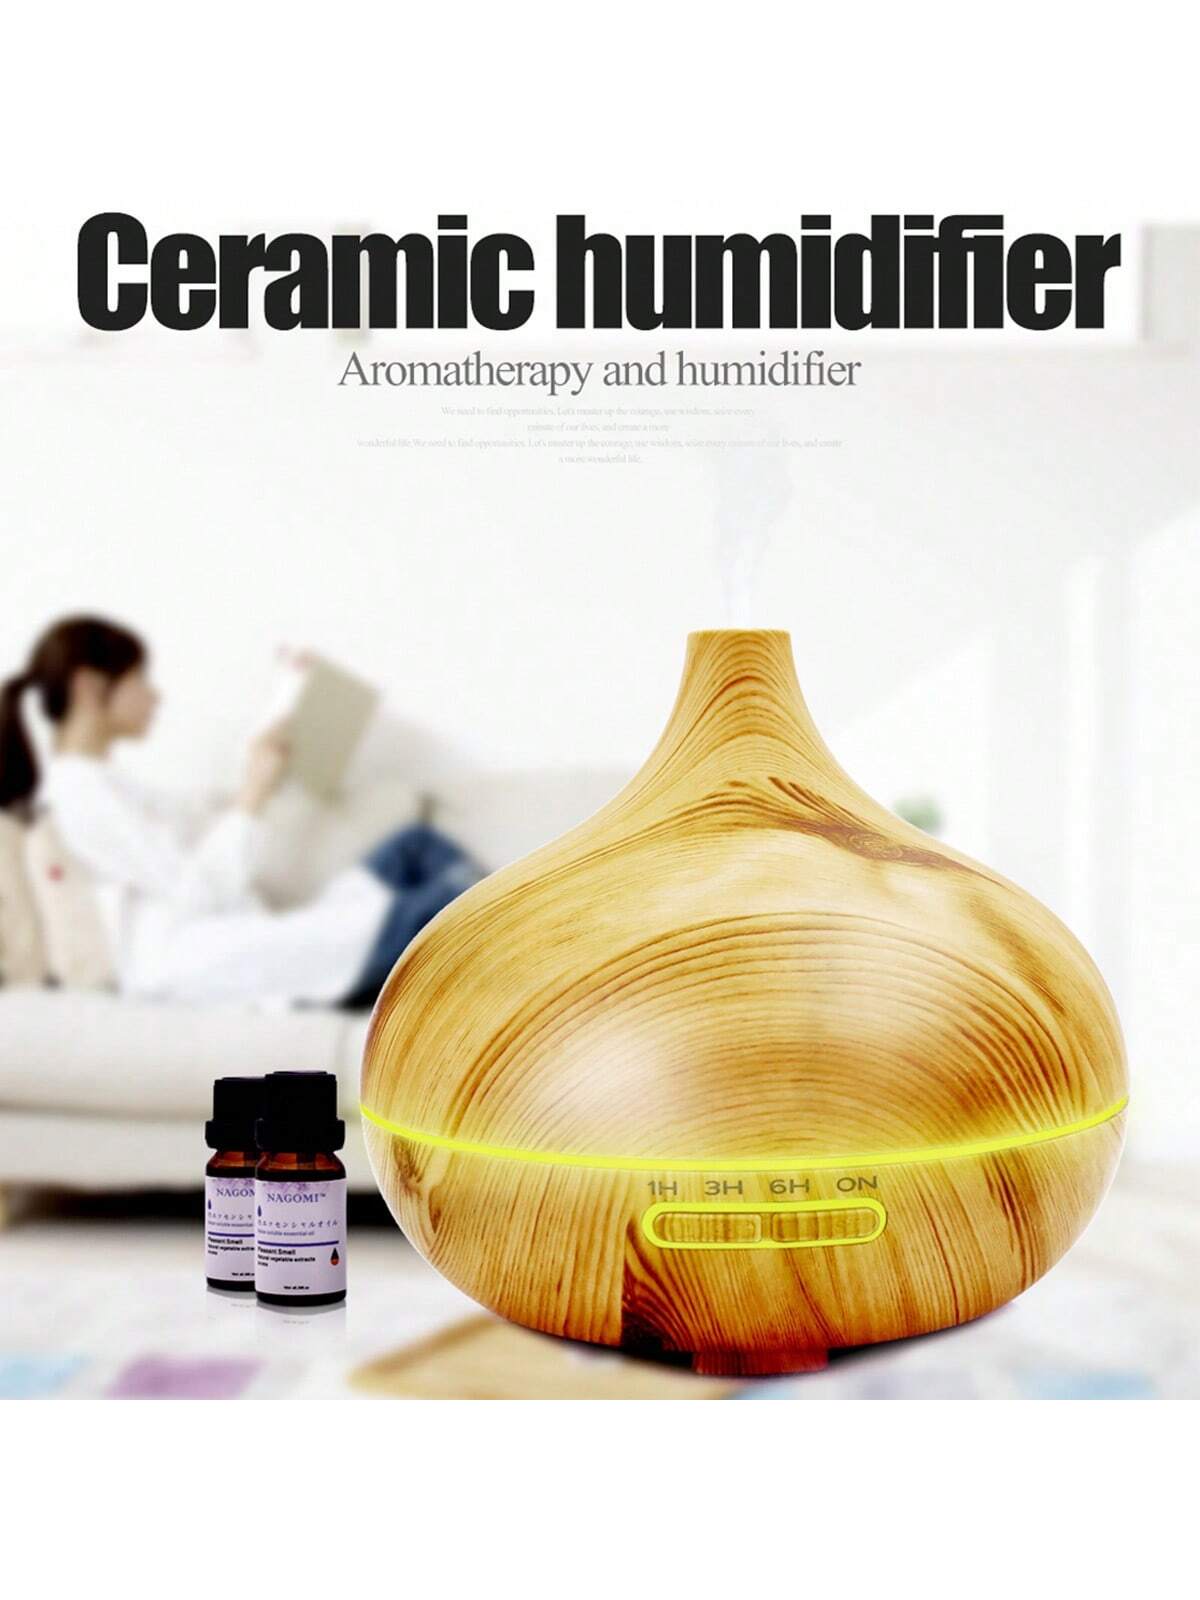 1pc Humidifier300ml Premium, Essential Oil Diffuser with Remote Control, 5 in 1 Ultrasonic Aromatherapy Fragrant Oil Humidifier Vaporizer, Timer and Auto-Off Safety Switch-wood color-7